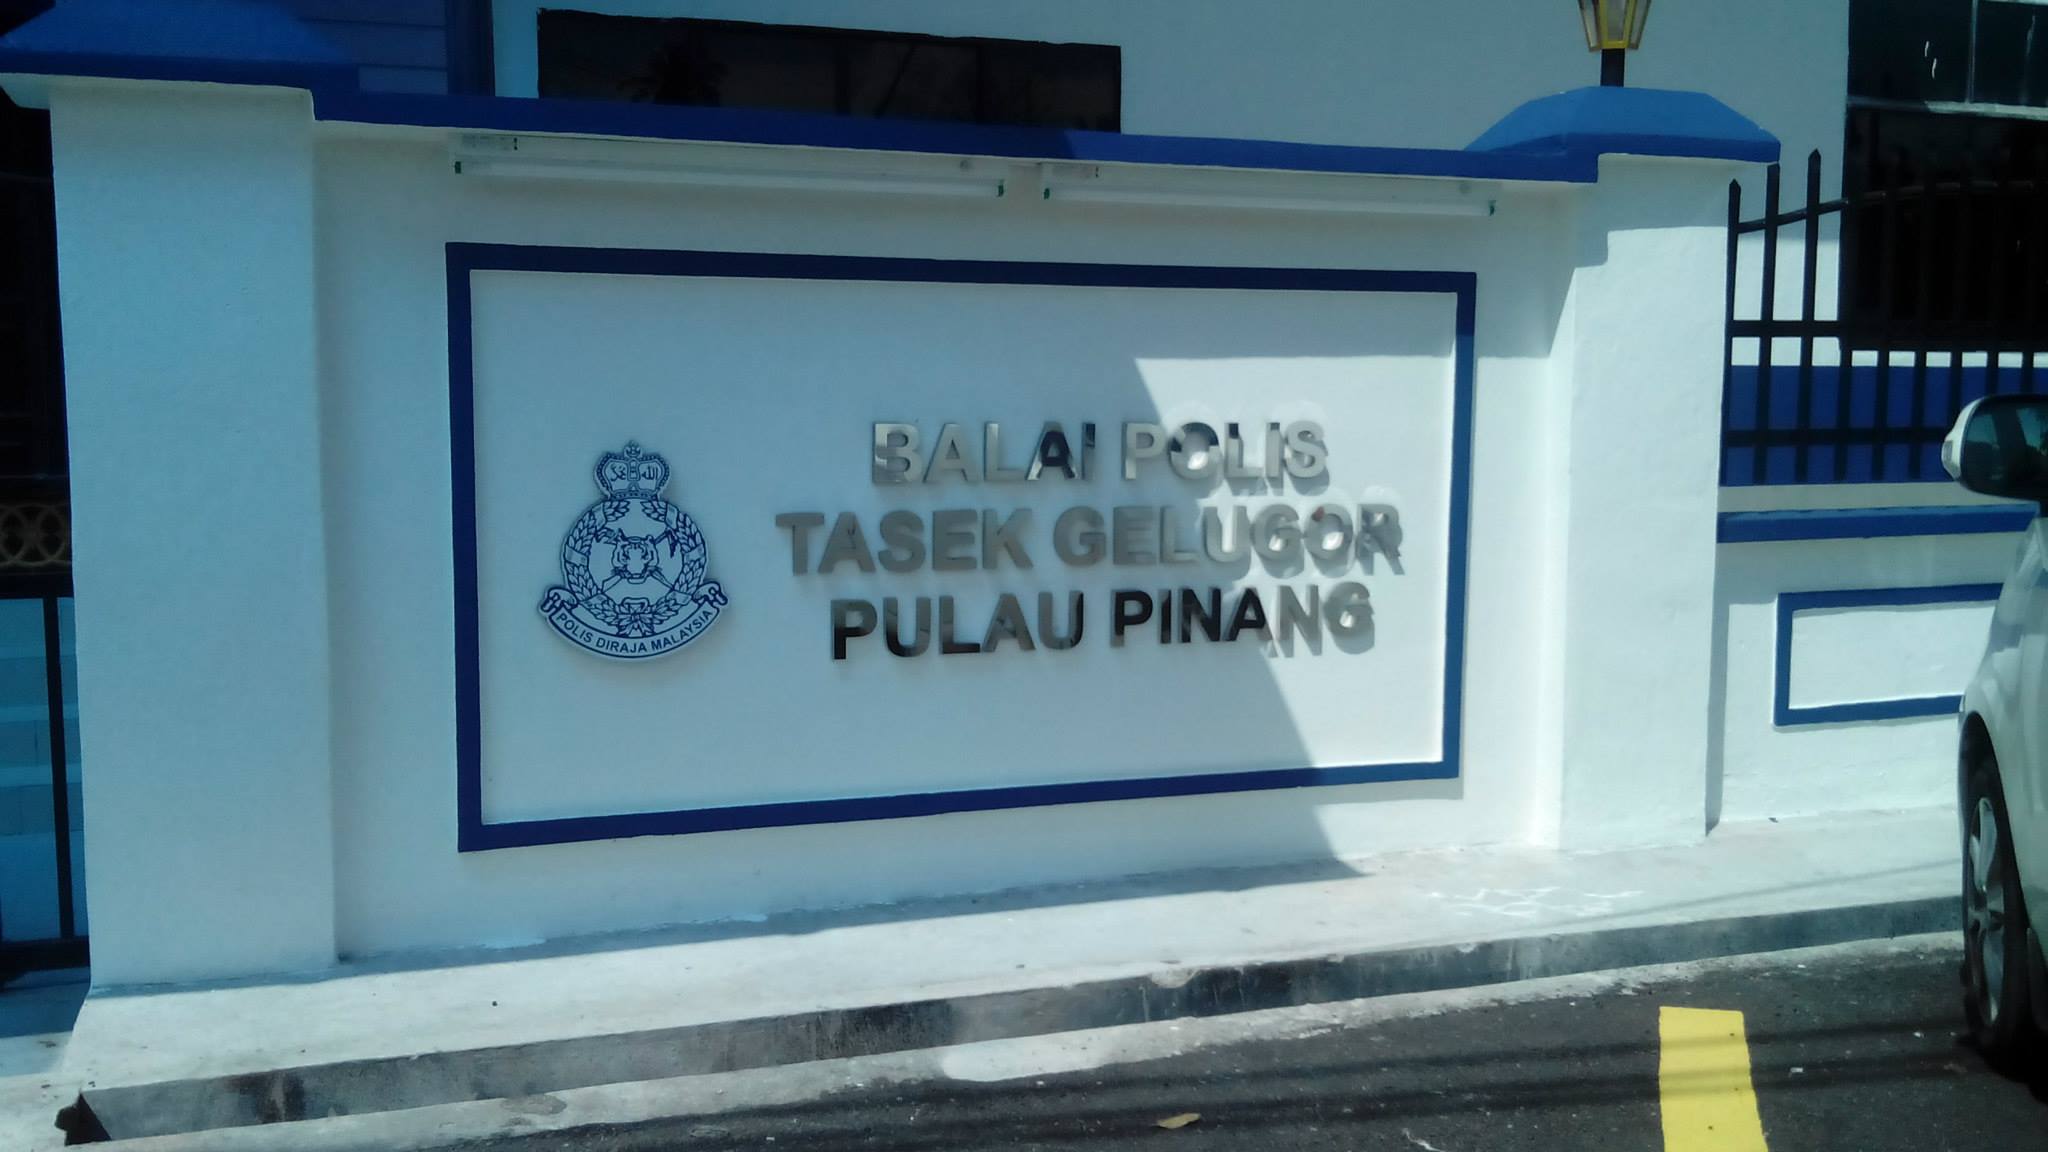 Authorities have confirmed that a police report has been lodged at the Tasek Gelugor police station over the incident. Image credit: AL-ANSAR Builders